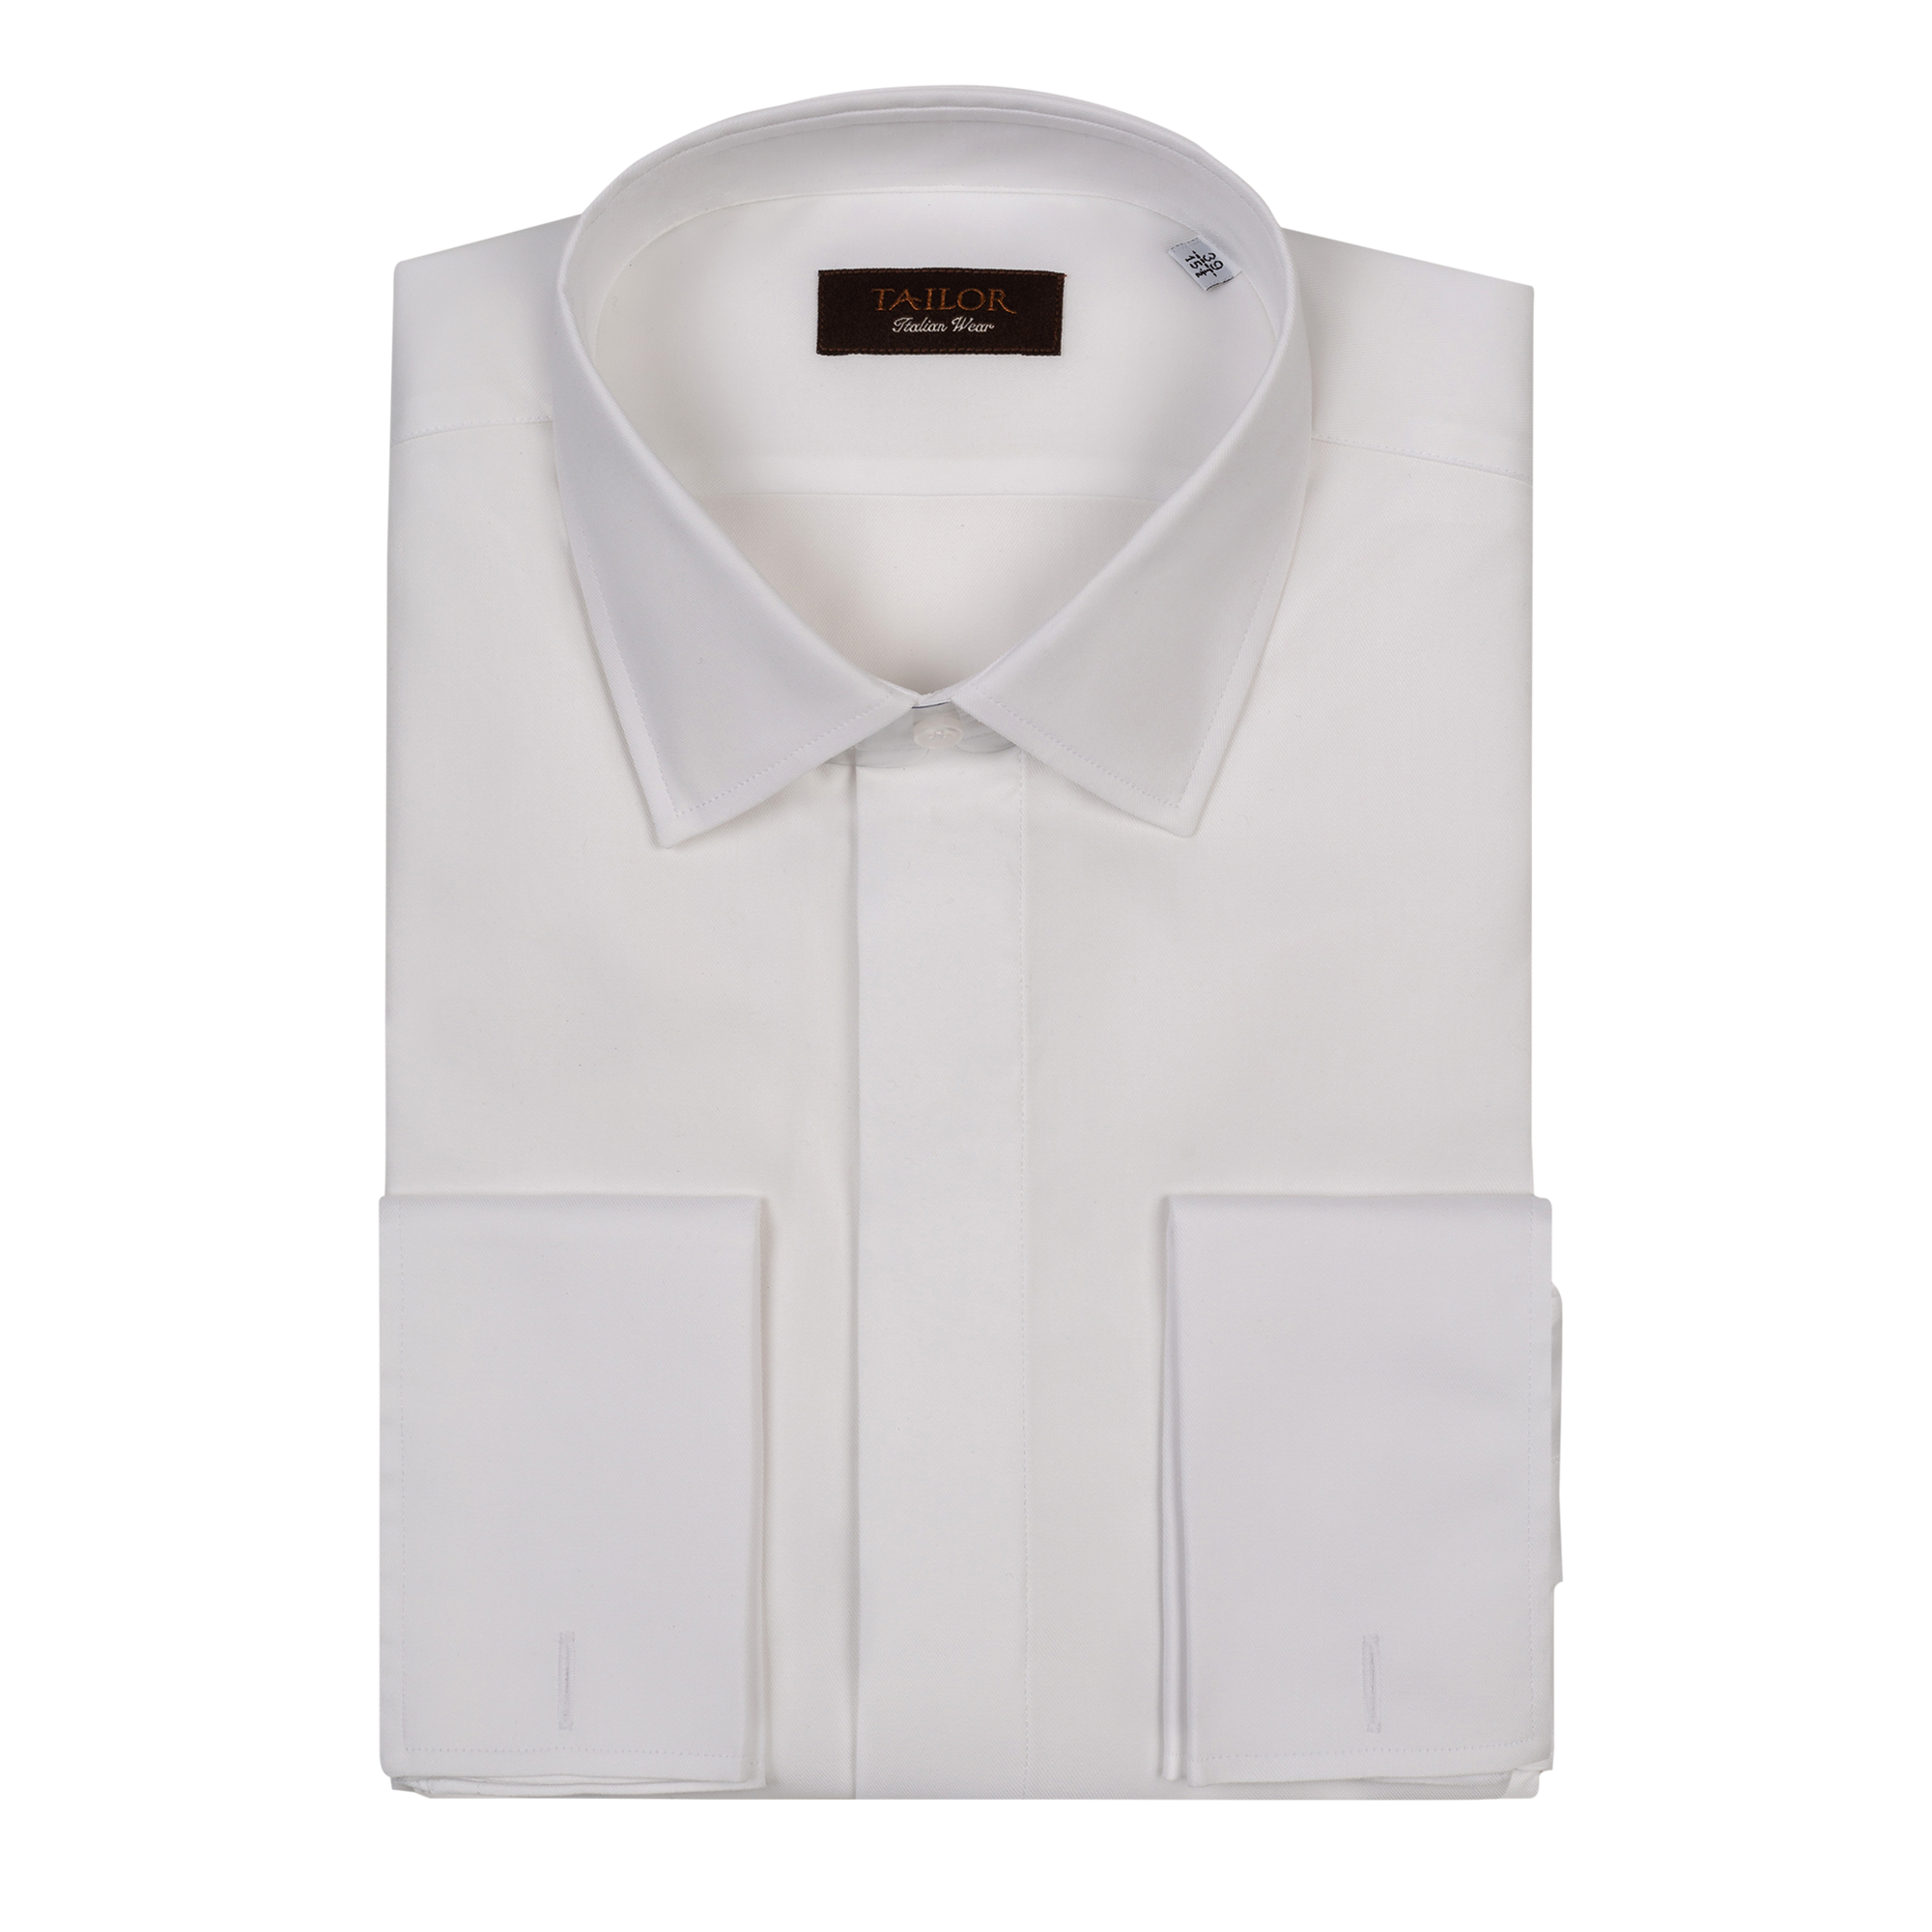 White Shirt with double cuffs